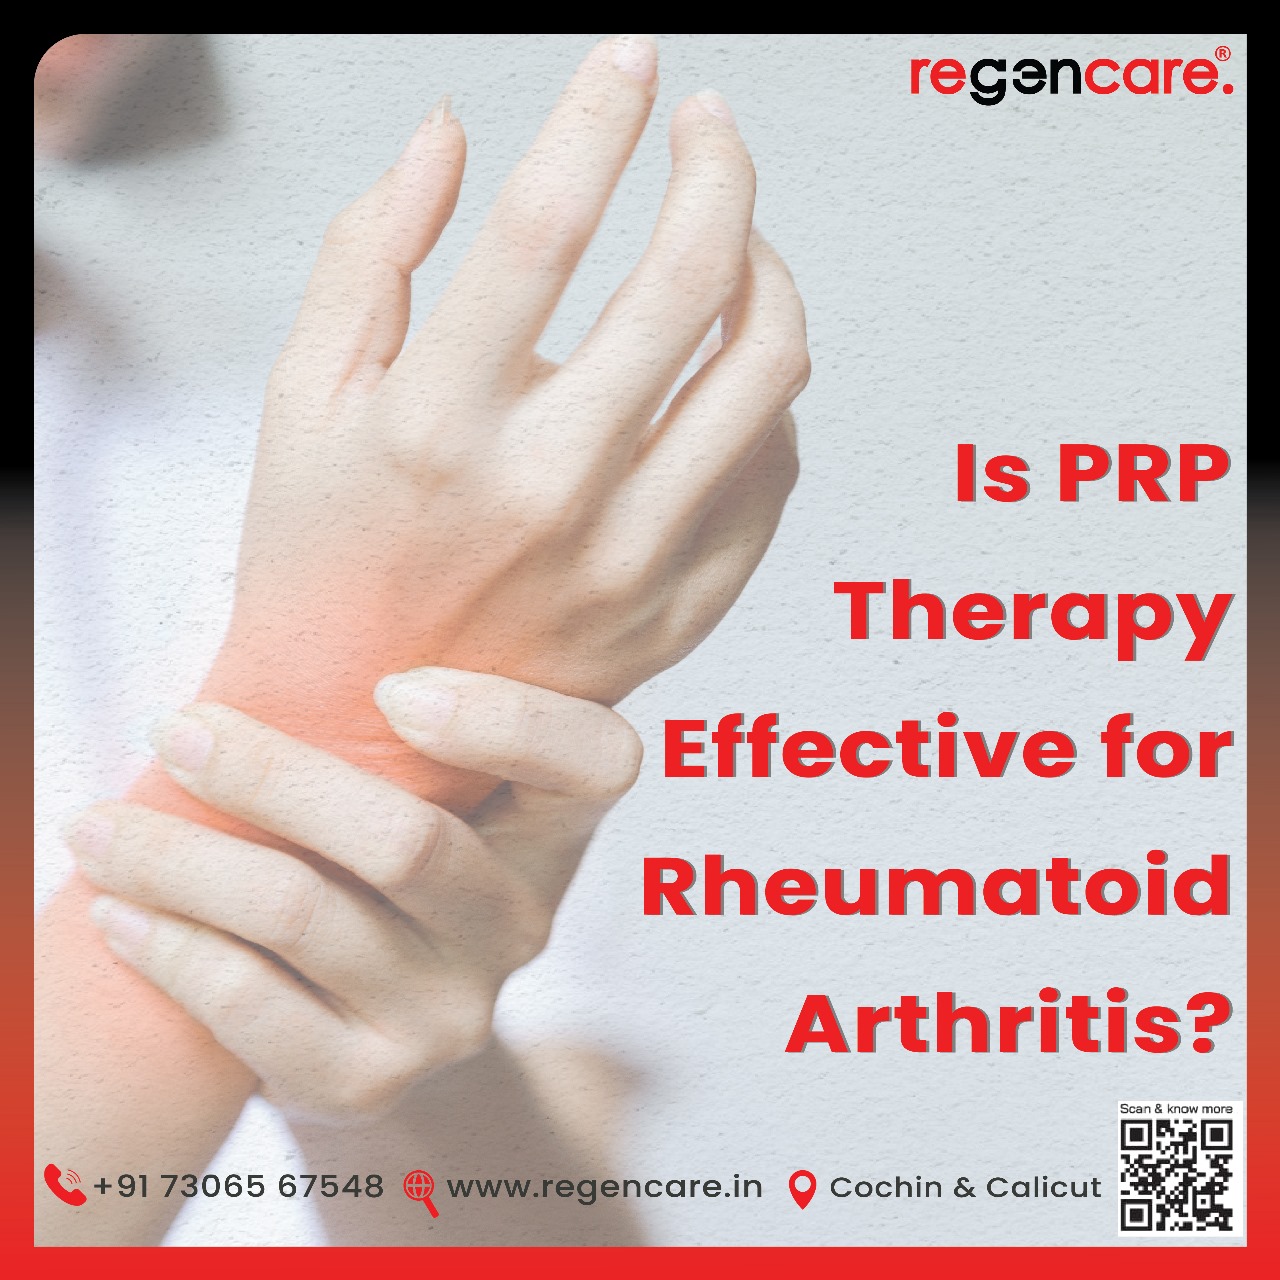 Is PRP Therapy Right for My Rheumatoid Arthritis